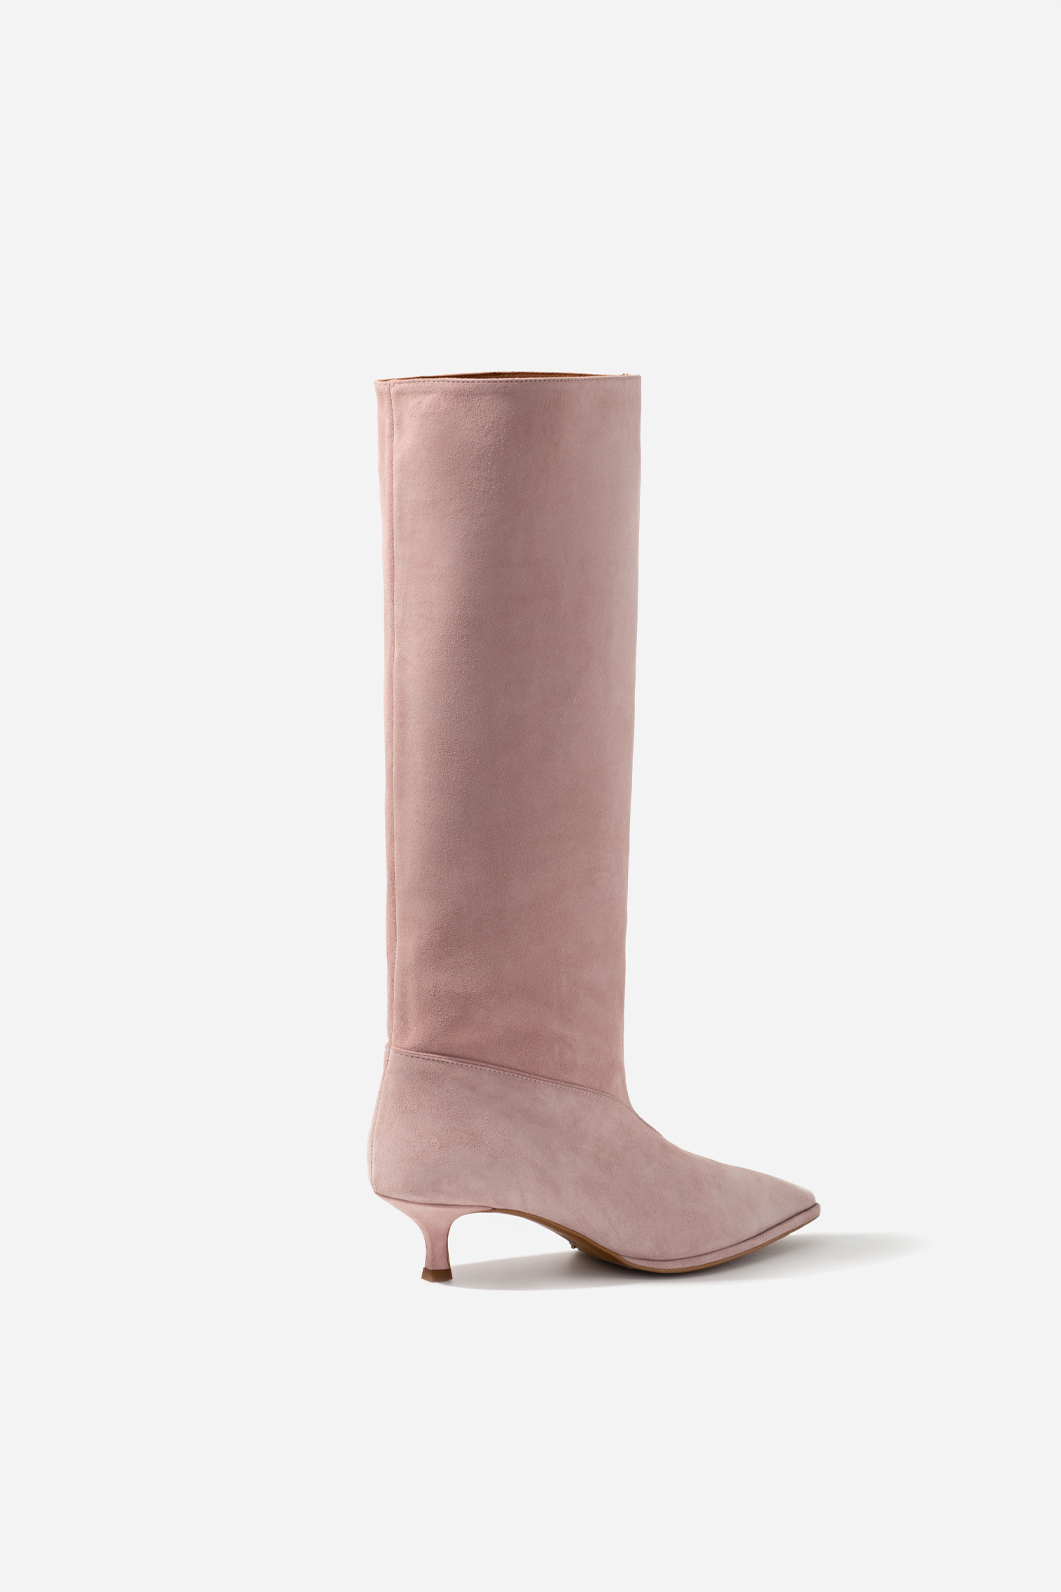 Erica pink suede boots